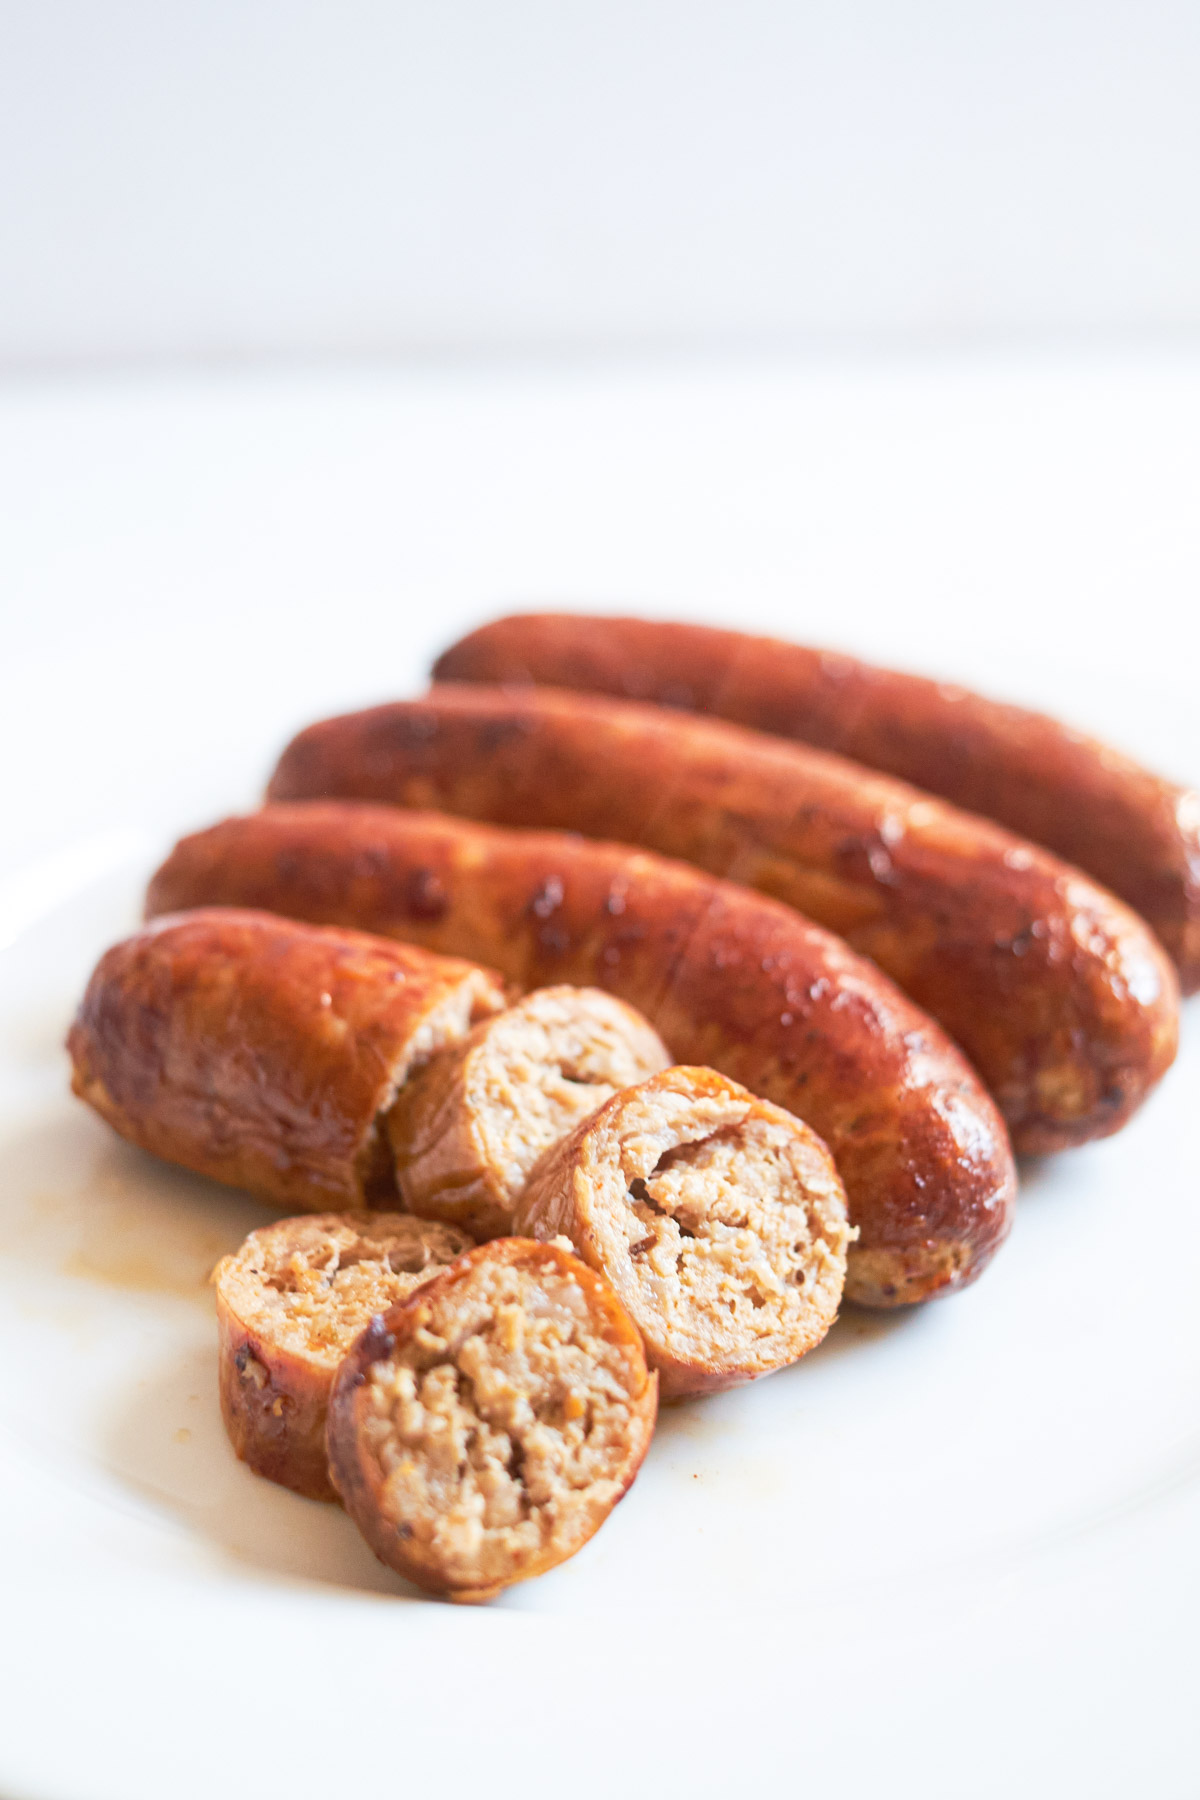 the completed Air Fryer Italian sausage sliced and served on a white plate